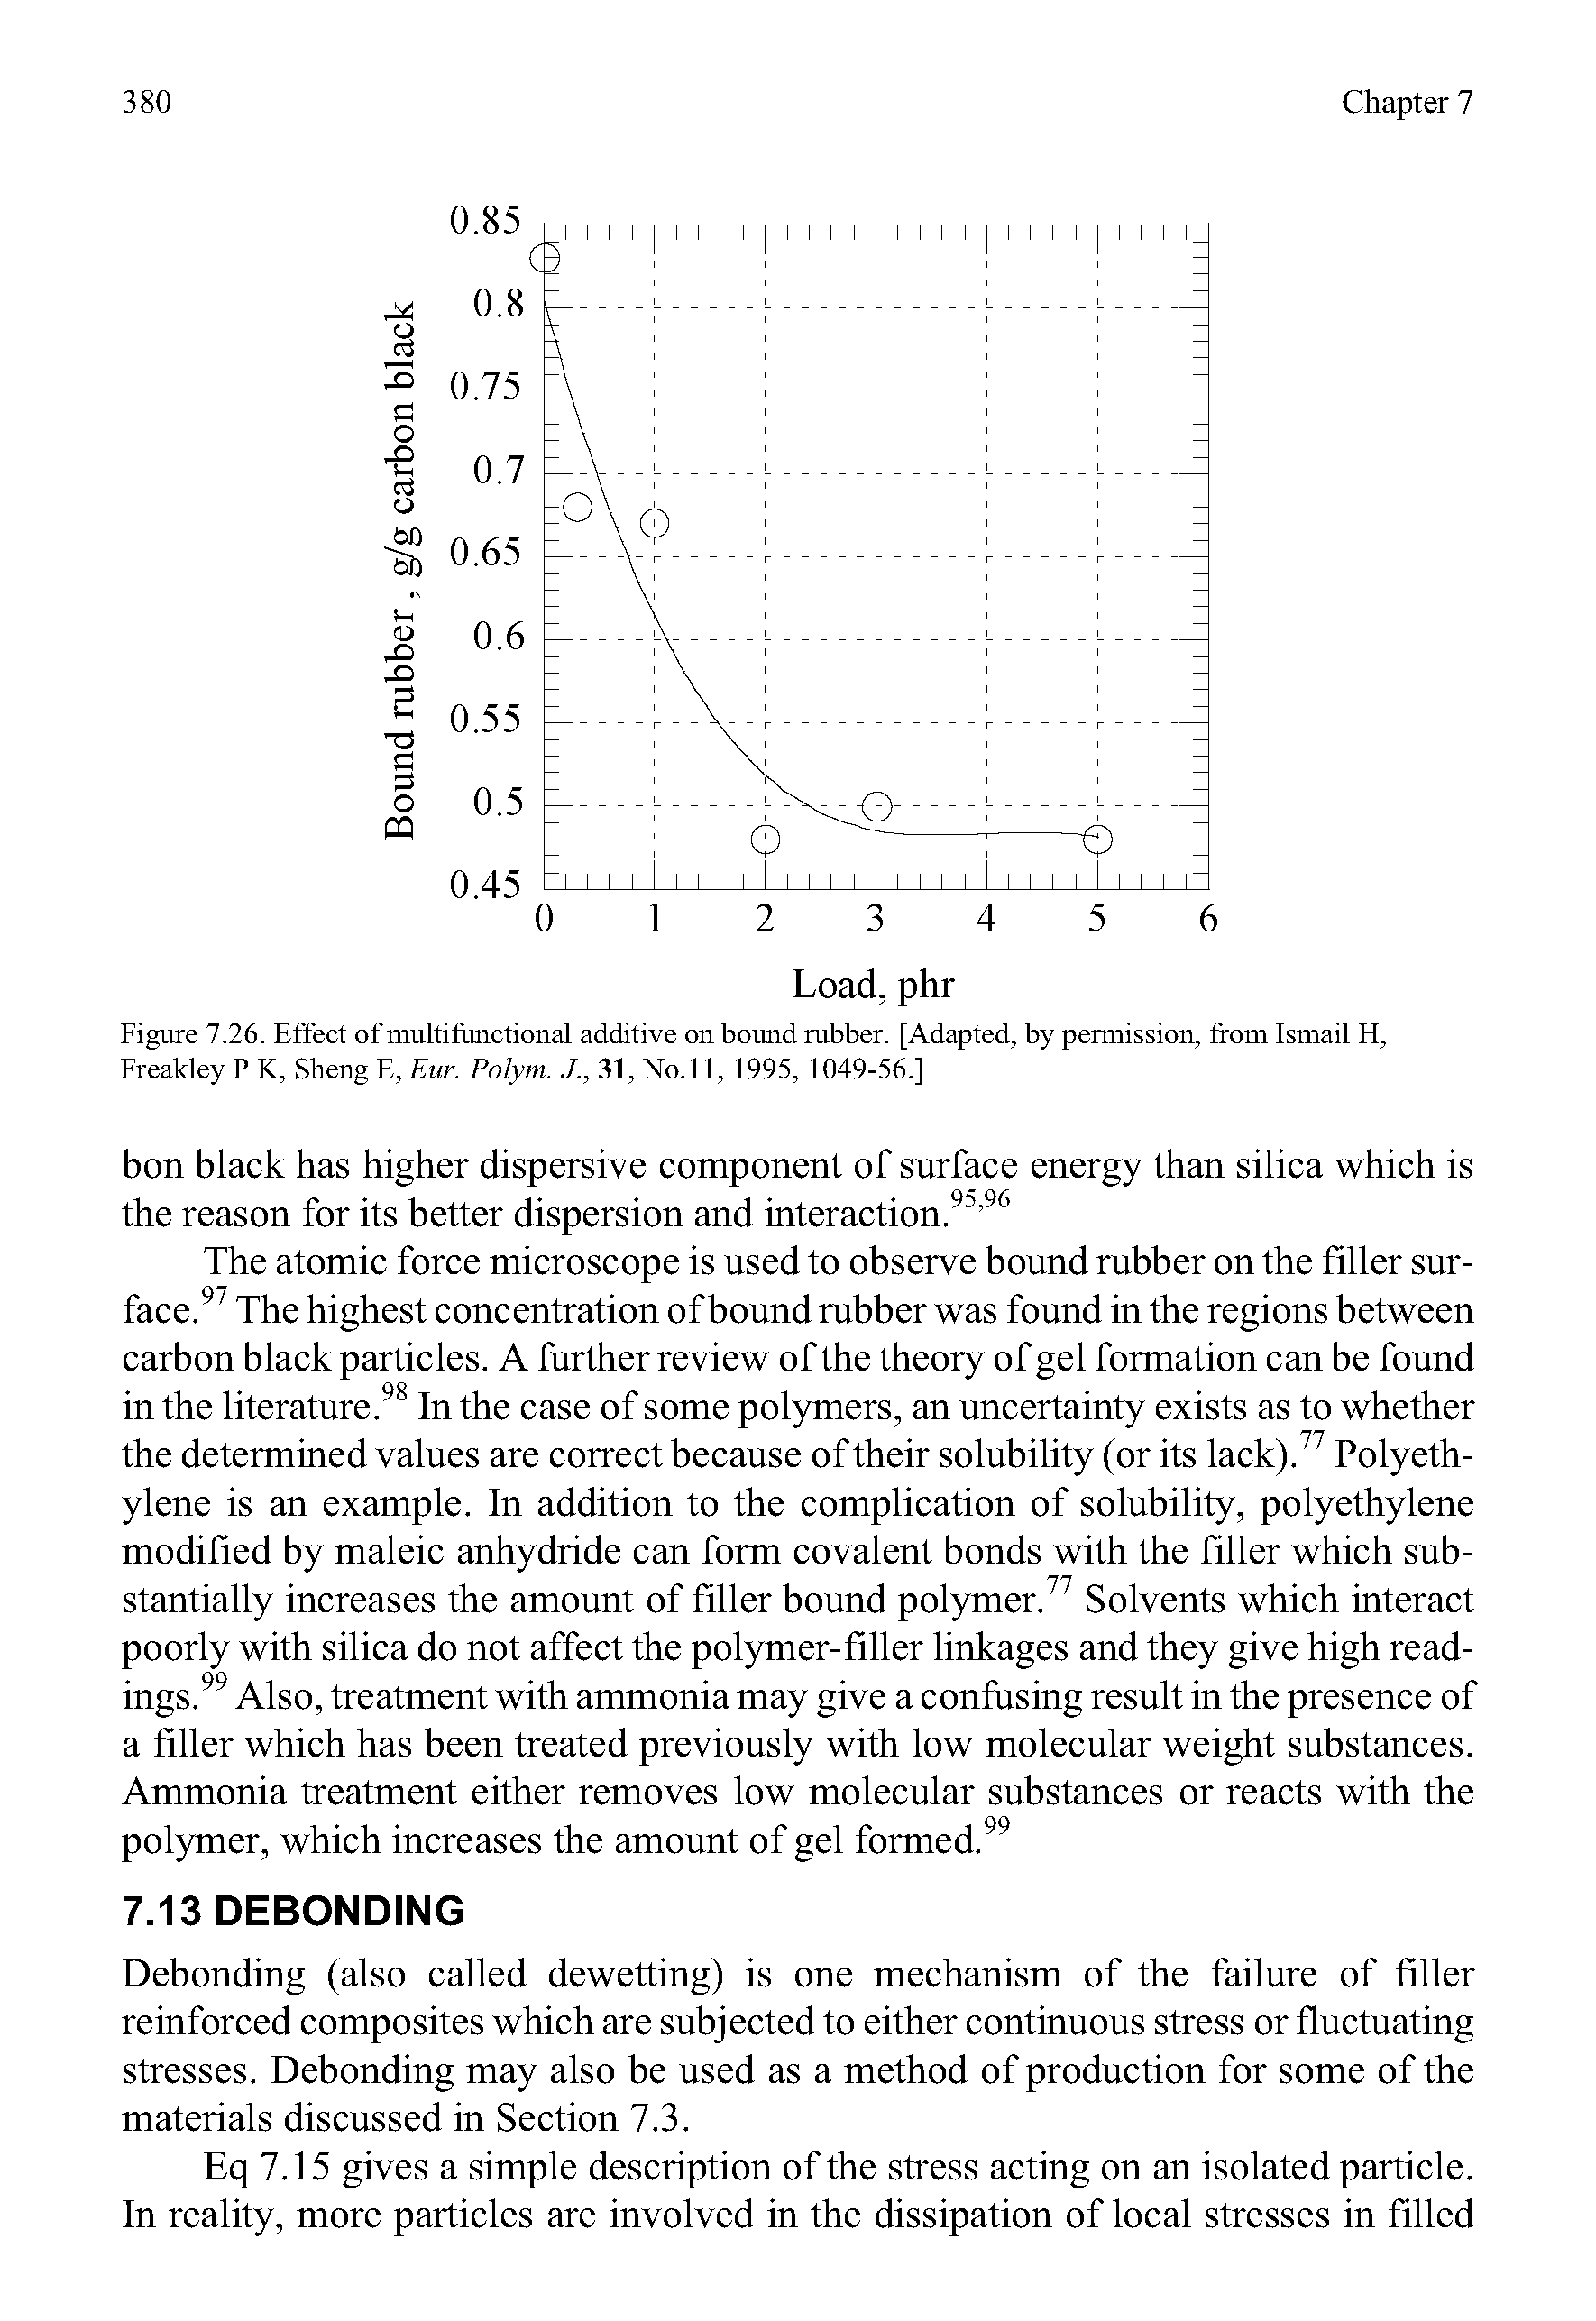 Figure 7.26. Effect of multifunctional additive on bound rubber. [Adapted, by permission, from Ismail H, Freakley P K, Sheng E, Eur. Polym. J., 31, No. 11, 1995, 1049-56.]...